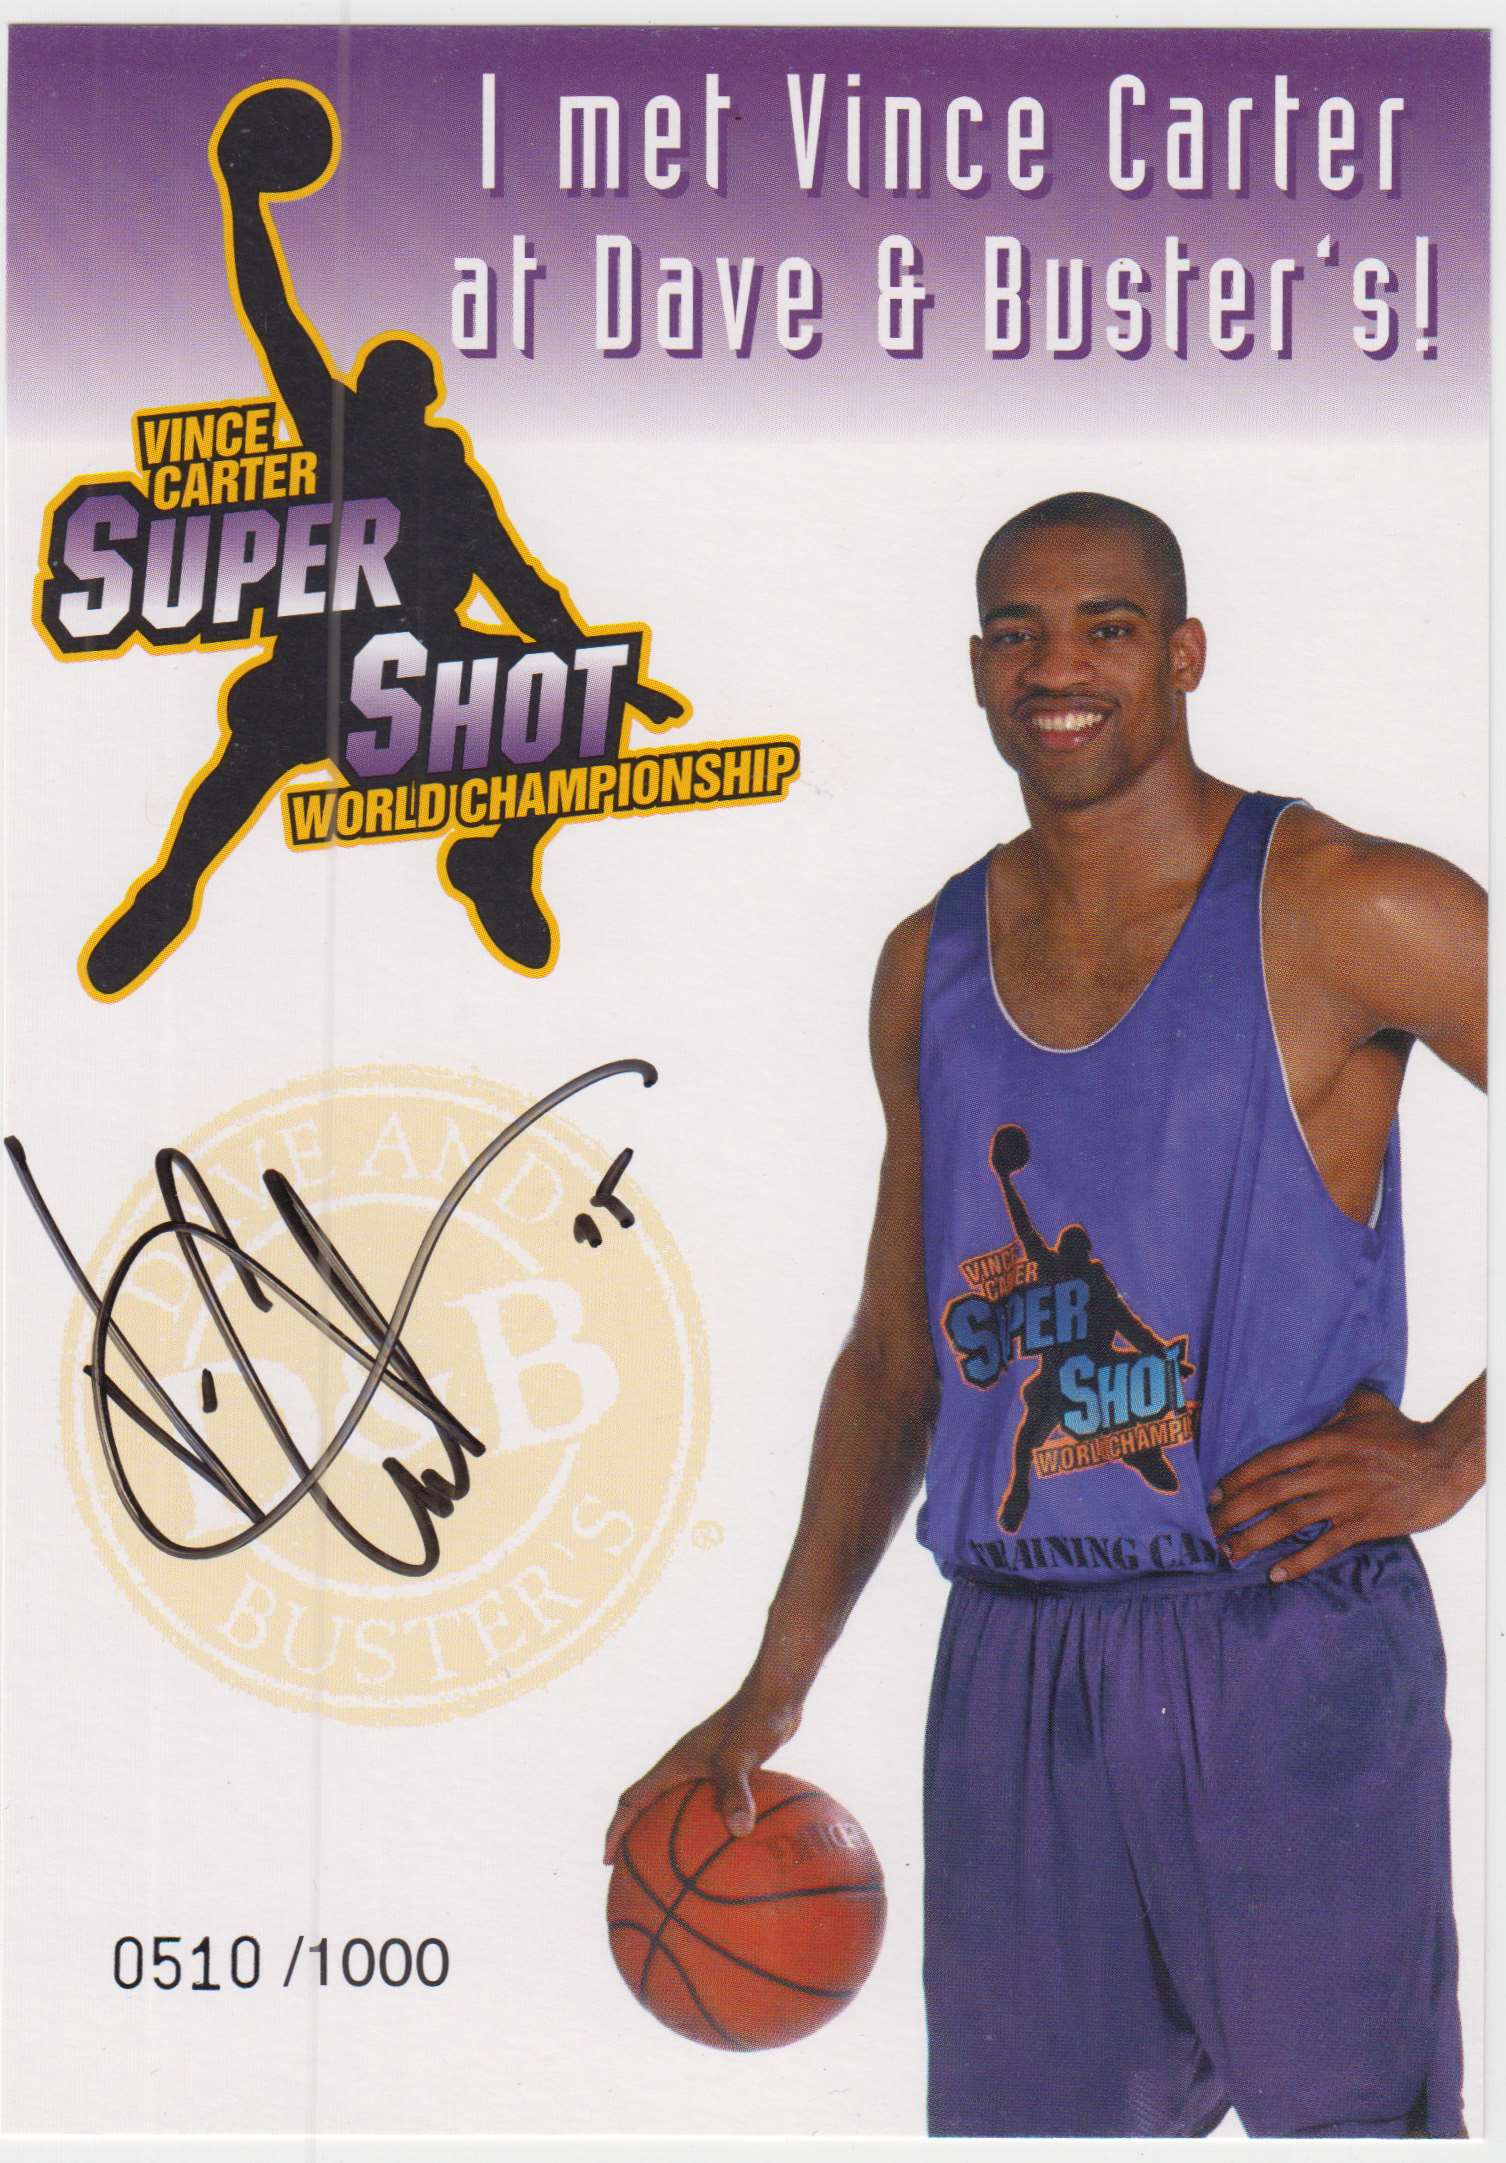 2019-20 ar Dave and buster's vince Carter #NNO card front image